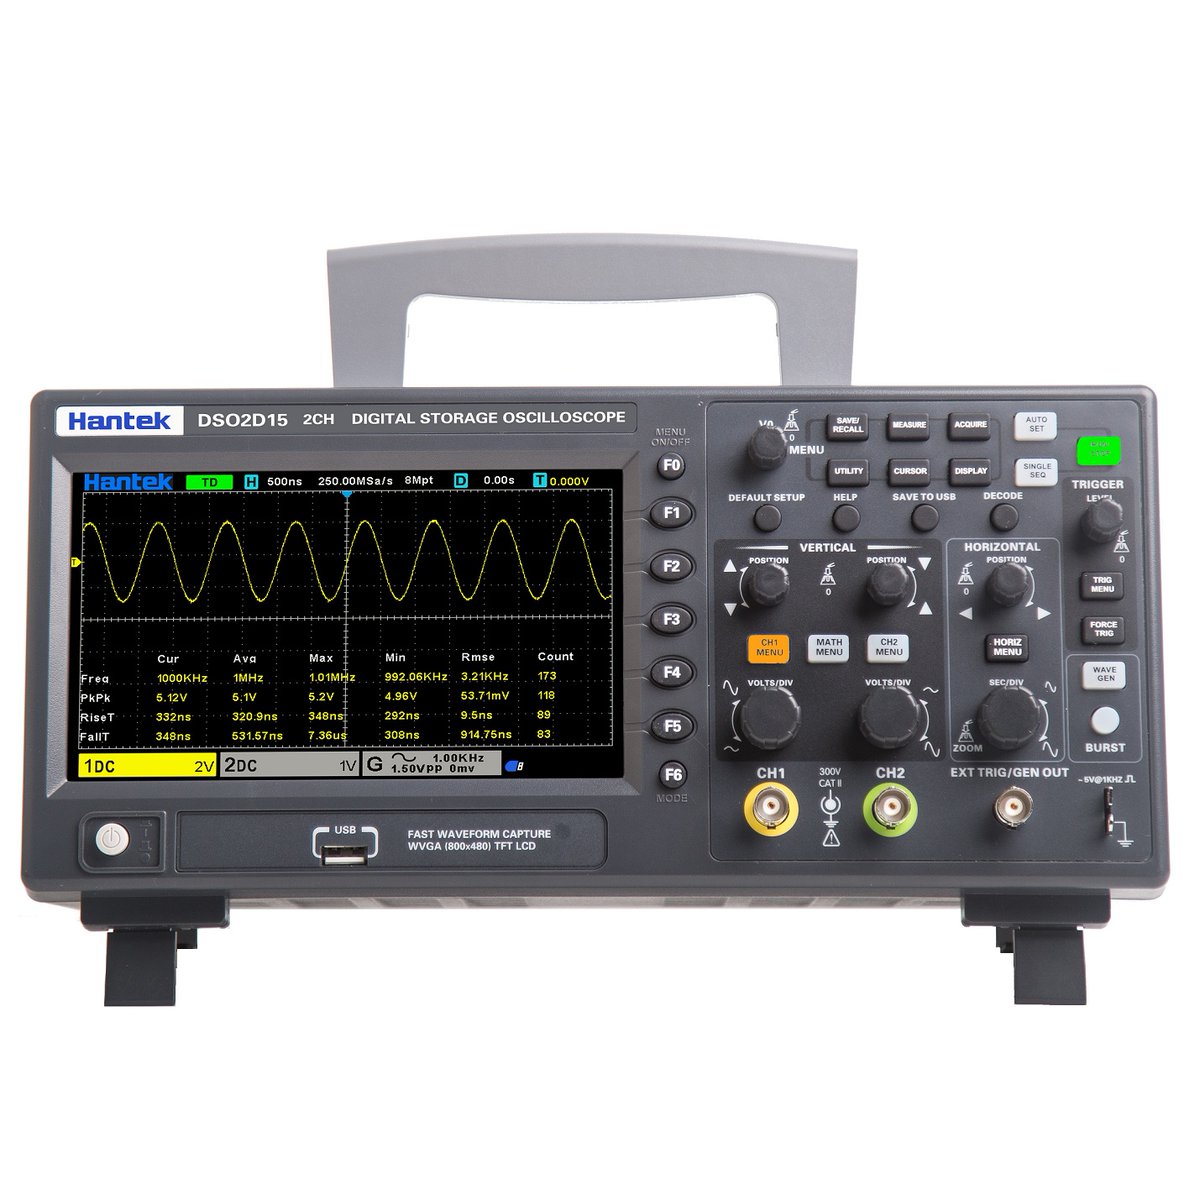 Hantek Oscilloscope DSO2D15

1) 2 channels which are respectively controlled by independent knobs
2) 100 MHZ and 150MHZ analog channel bandwidth
3) Sampling rate up to 1 GSa/s
4) 8M memory depth
5) Vertical range 2mV/div ~ 10V/div
6) Built-in 1 CH 25MHz waveform generator https://t.co/dsM5SEDUPT